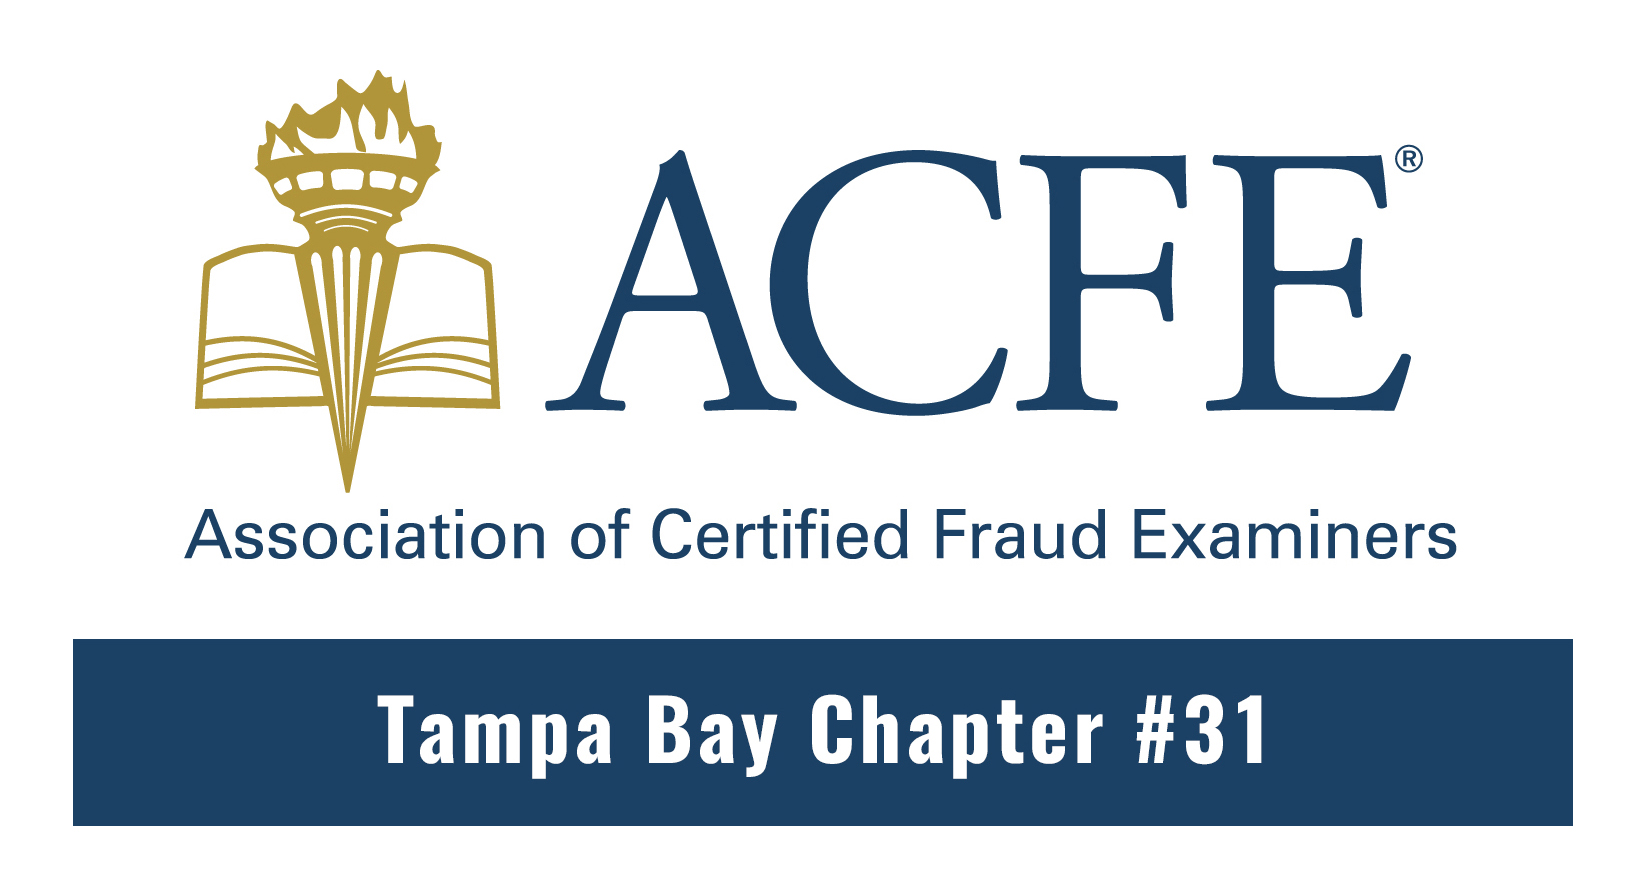 ACFE Tampa Bay: Association of Certified Fraud Examiners